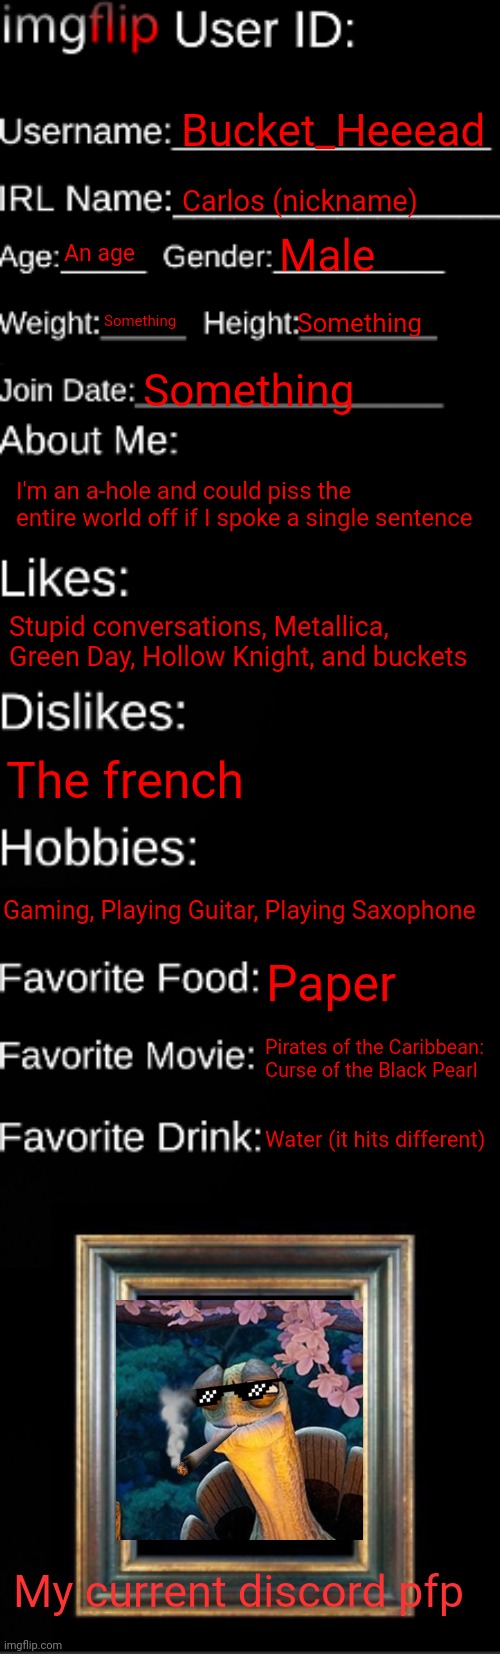 I have returned so I made this again | Bucket_Heeead; Carlos (nickname); An age; Male; Something; Something; Something; I'm an a-hole and could piss the entire world off if I spoke a single sentence; Stupid conversations, Metallica, Green Day, Hollow Knight, and buckets; The french; Gaming, Playing Guitar, Playing Saxophone; Paper; Pirates of the Caribbean: Curse of the Black Pearl; Water (it hits different); My current discord pfp | image tagged in imgflip id card | made w/ Imgflip meme maker